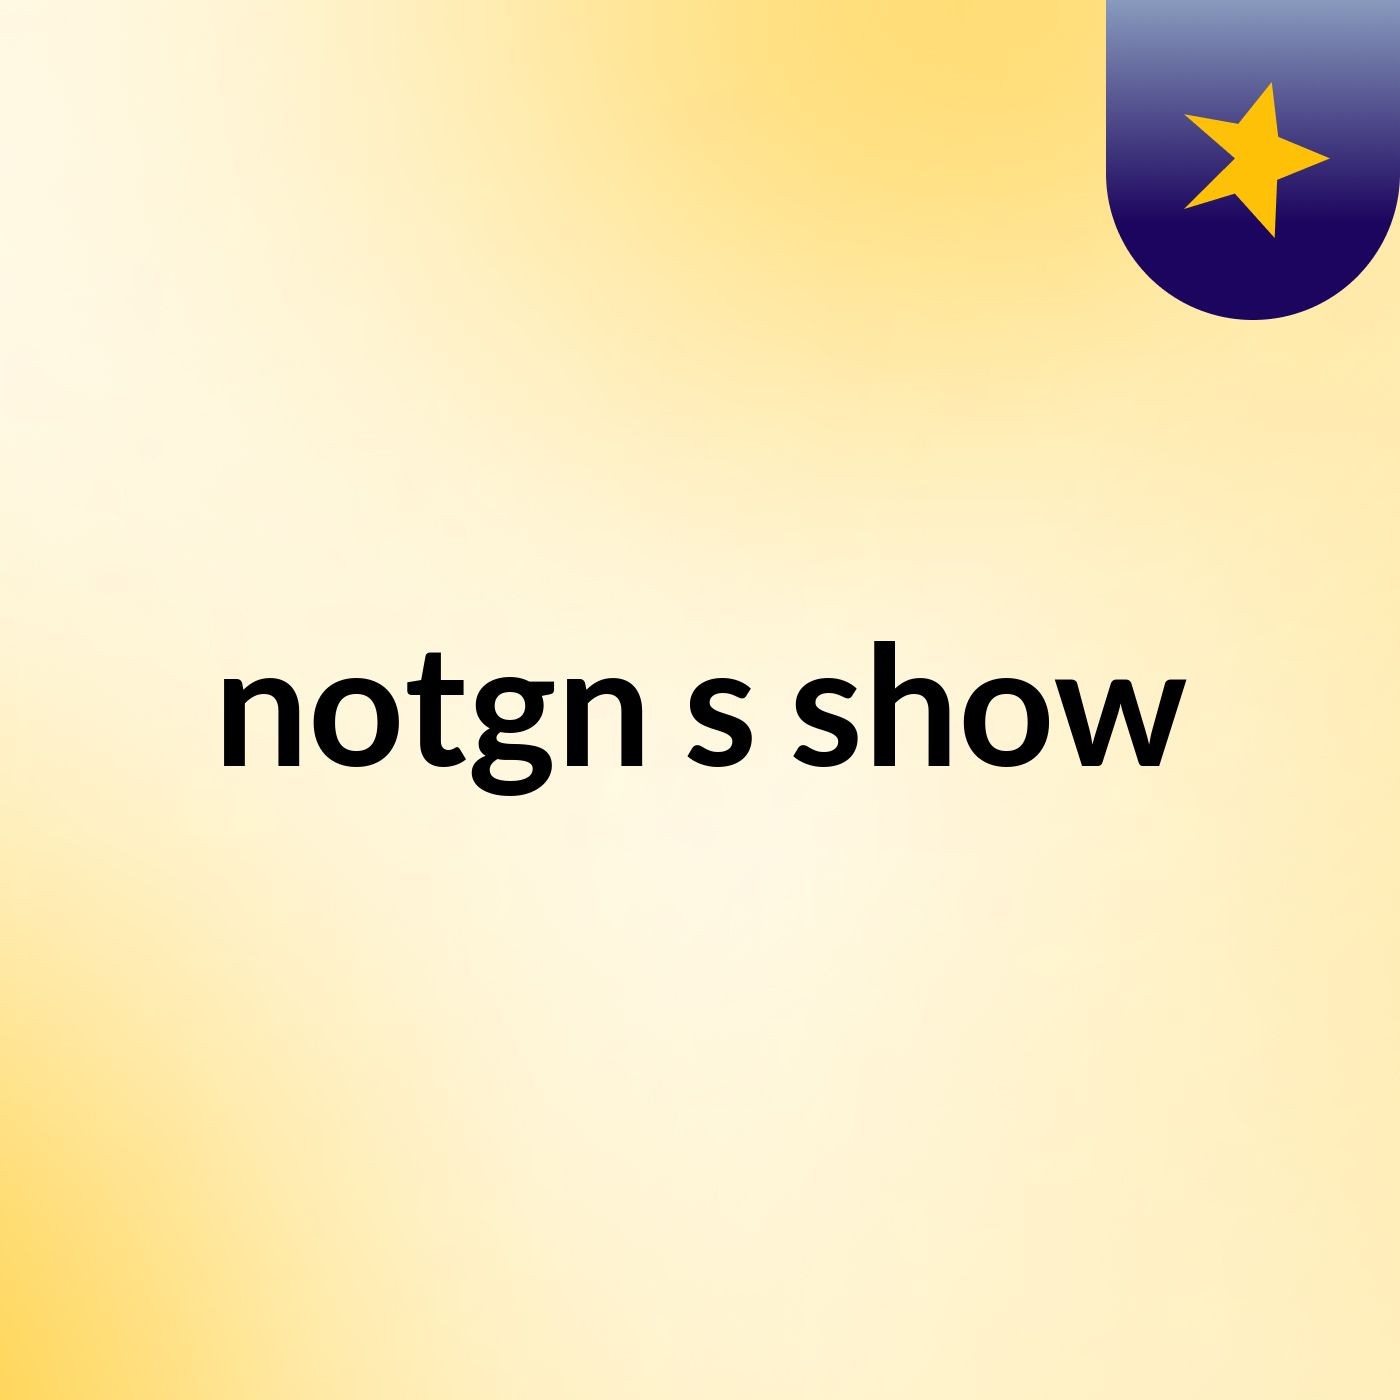 notgn's show